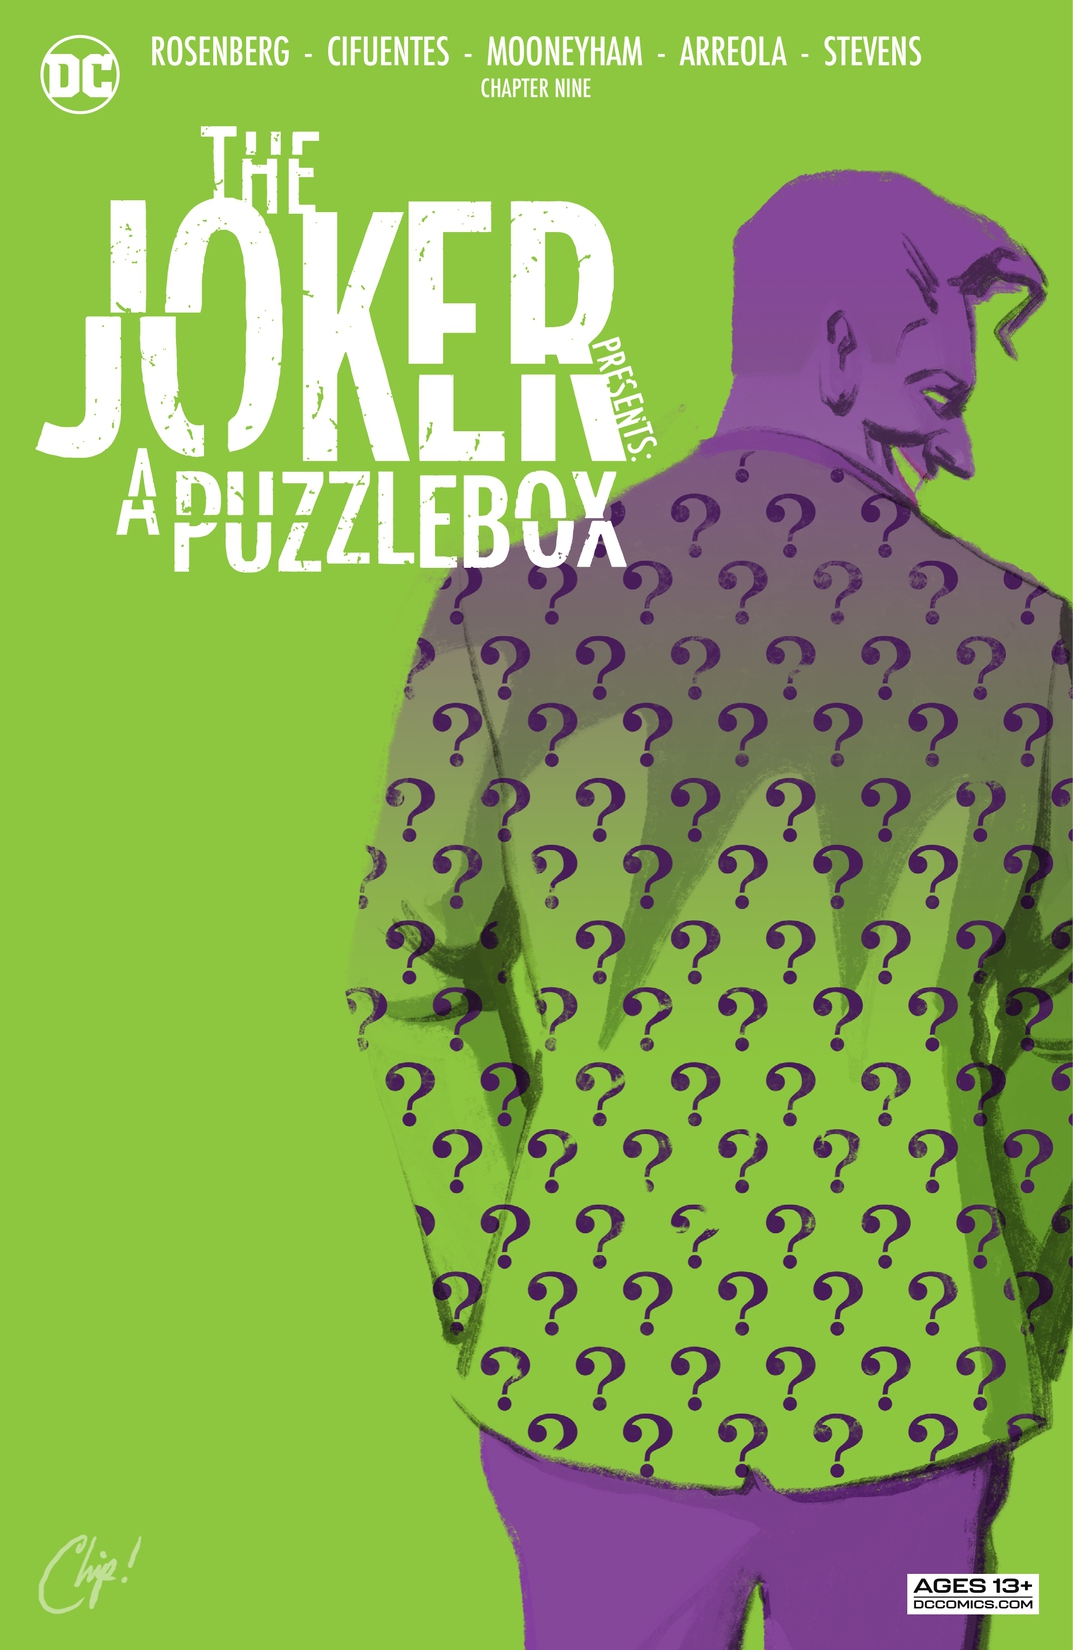 The Joker Presents: A Puzzlebox Director's Cut #9 preview images